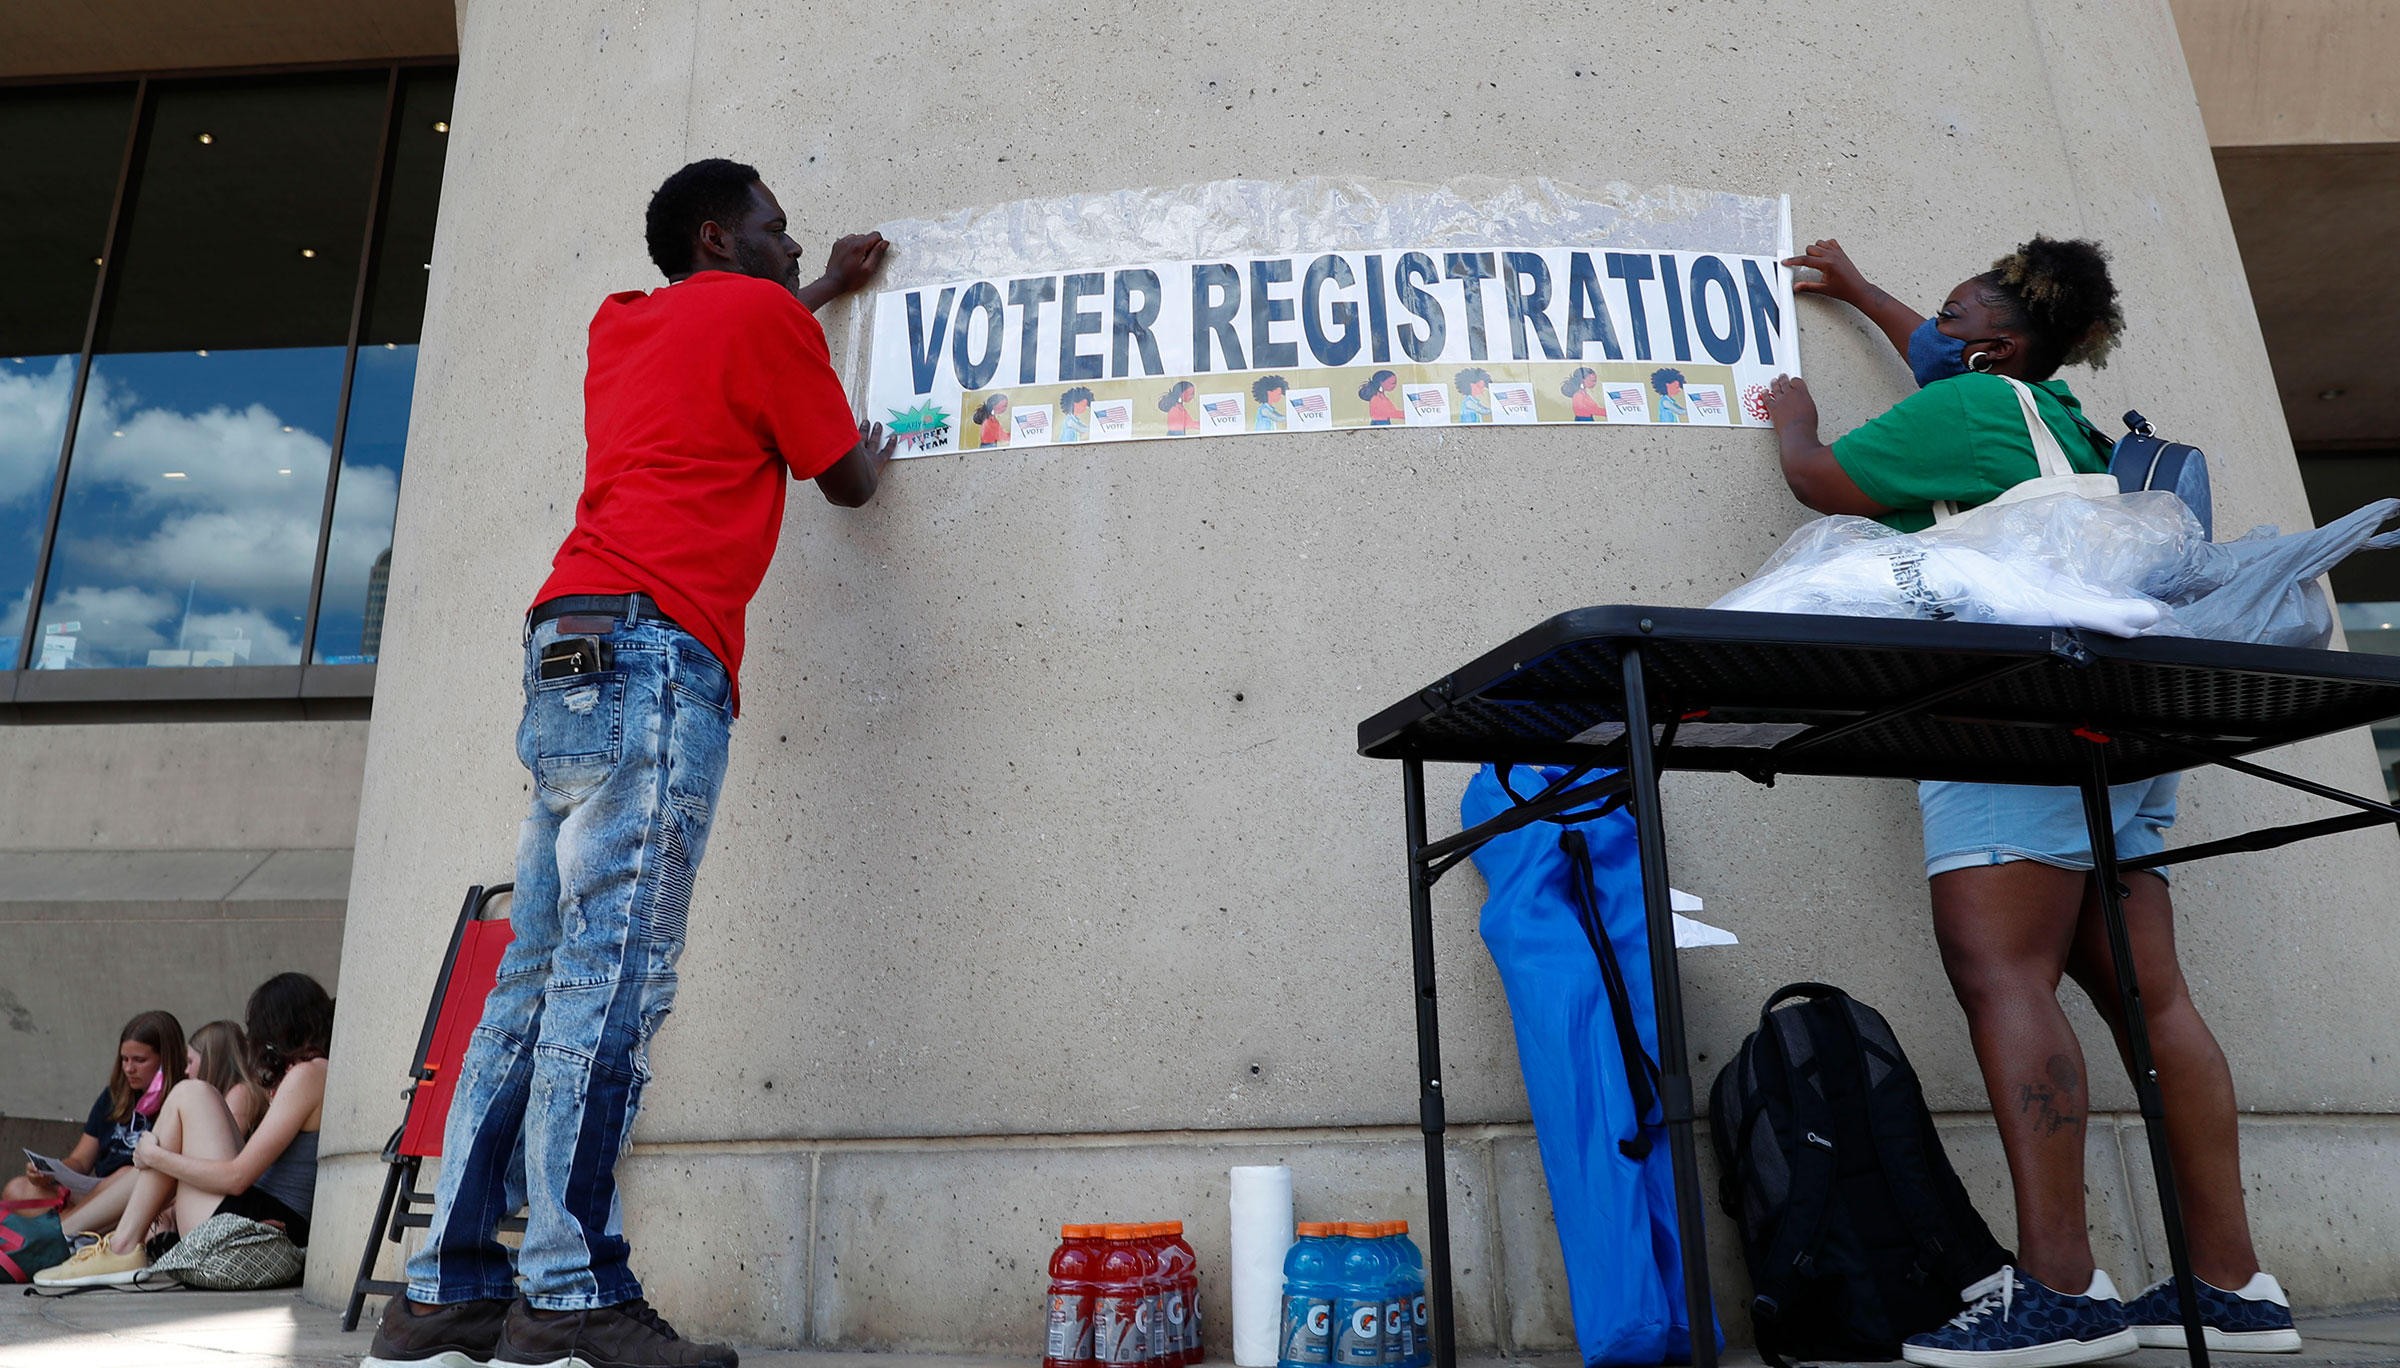 Aetry Jones, left, and Caerry Rigbon tape up a voter registration sign on Dallas City Hall before a Juneteenth 2020 celebration and protest against police brutality in Dallas, on June 19, 2020. (LM Otero—AP)